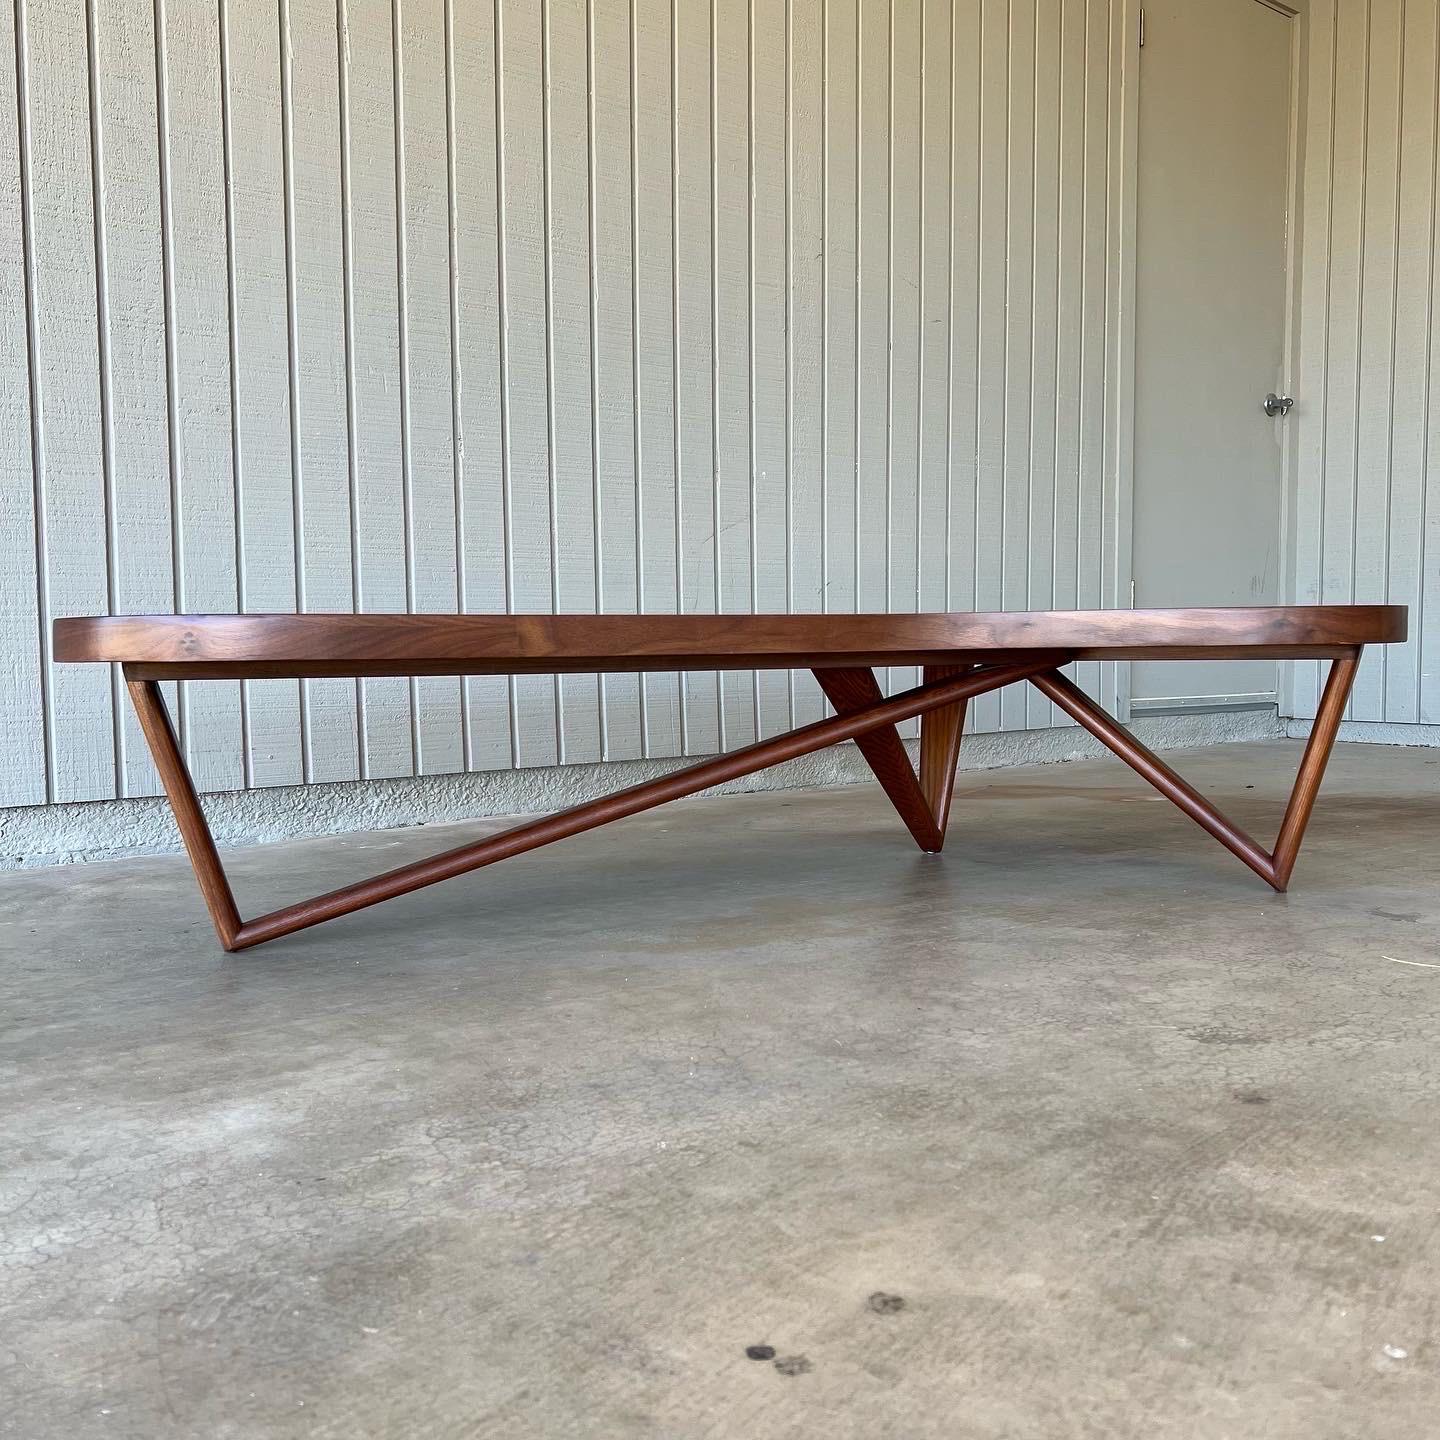 Mid-Century Modern boomerang or kidney-shaped coffee table with sculptural wood legs, 1950s-1960s, unsure of maker, but this table is one that is truly rare. This table was completely brought this table back to life, refinished and added a new